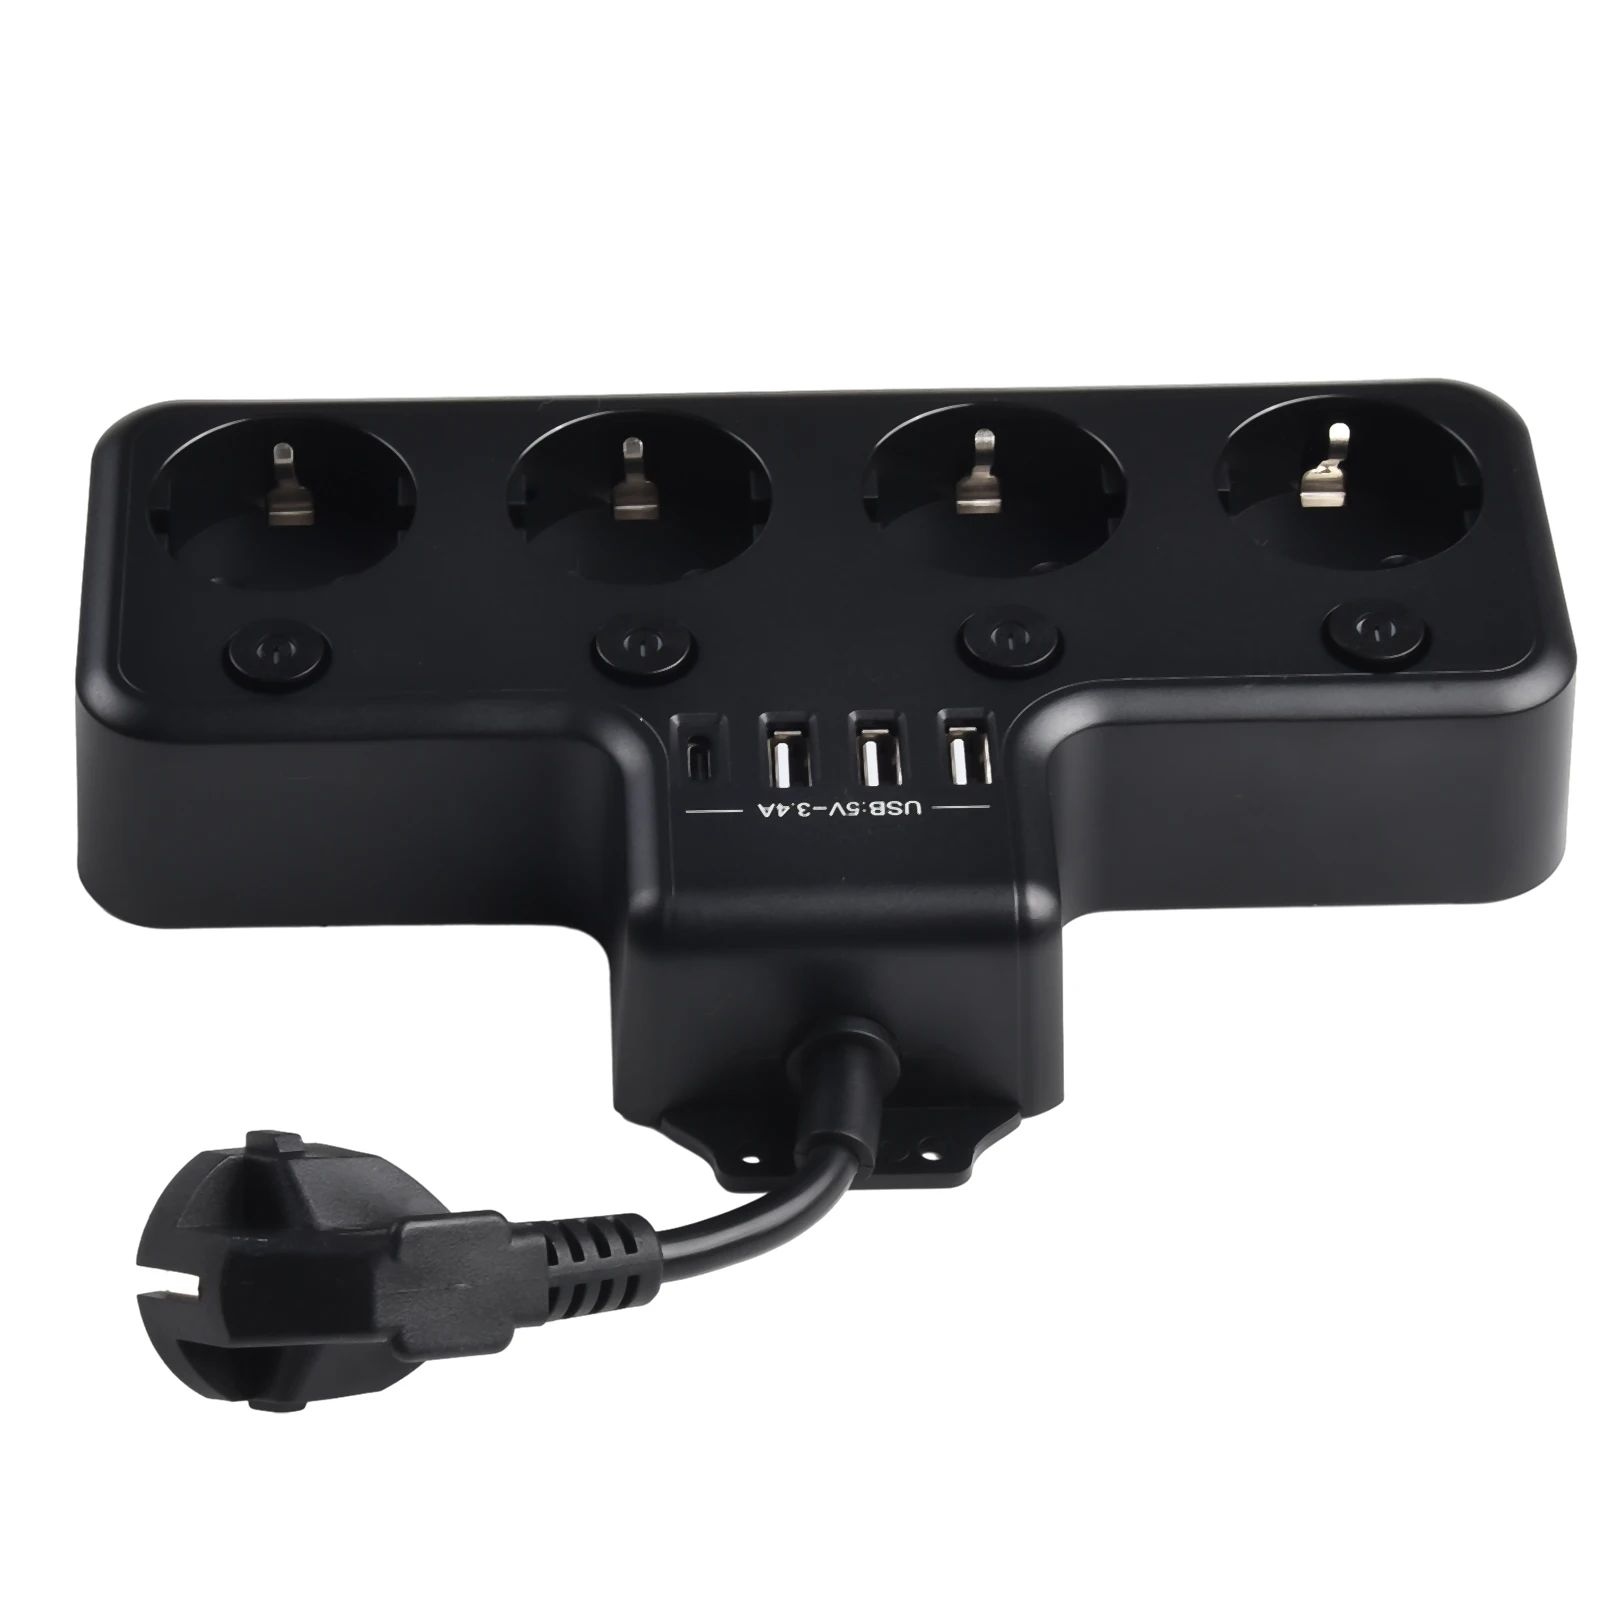 

Simultaneously Charge Multiple Devices With This 16A 4000W 4 Way Power Strip Including USB Ports And EU Sockets